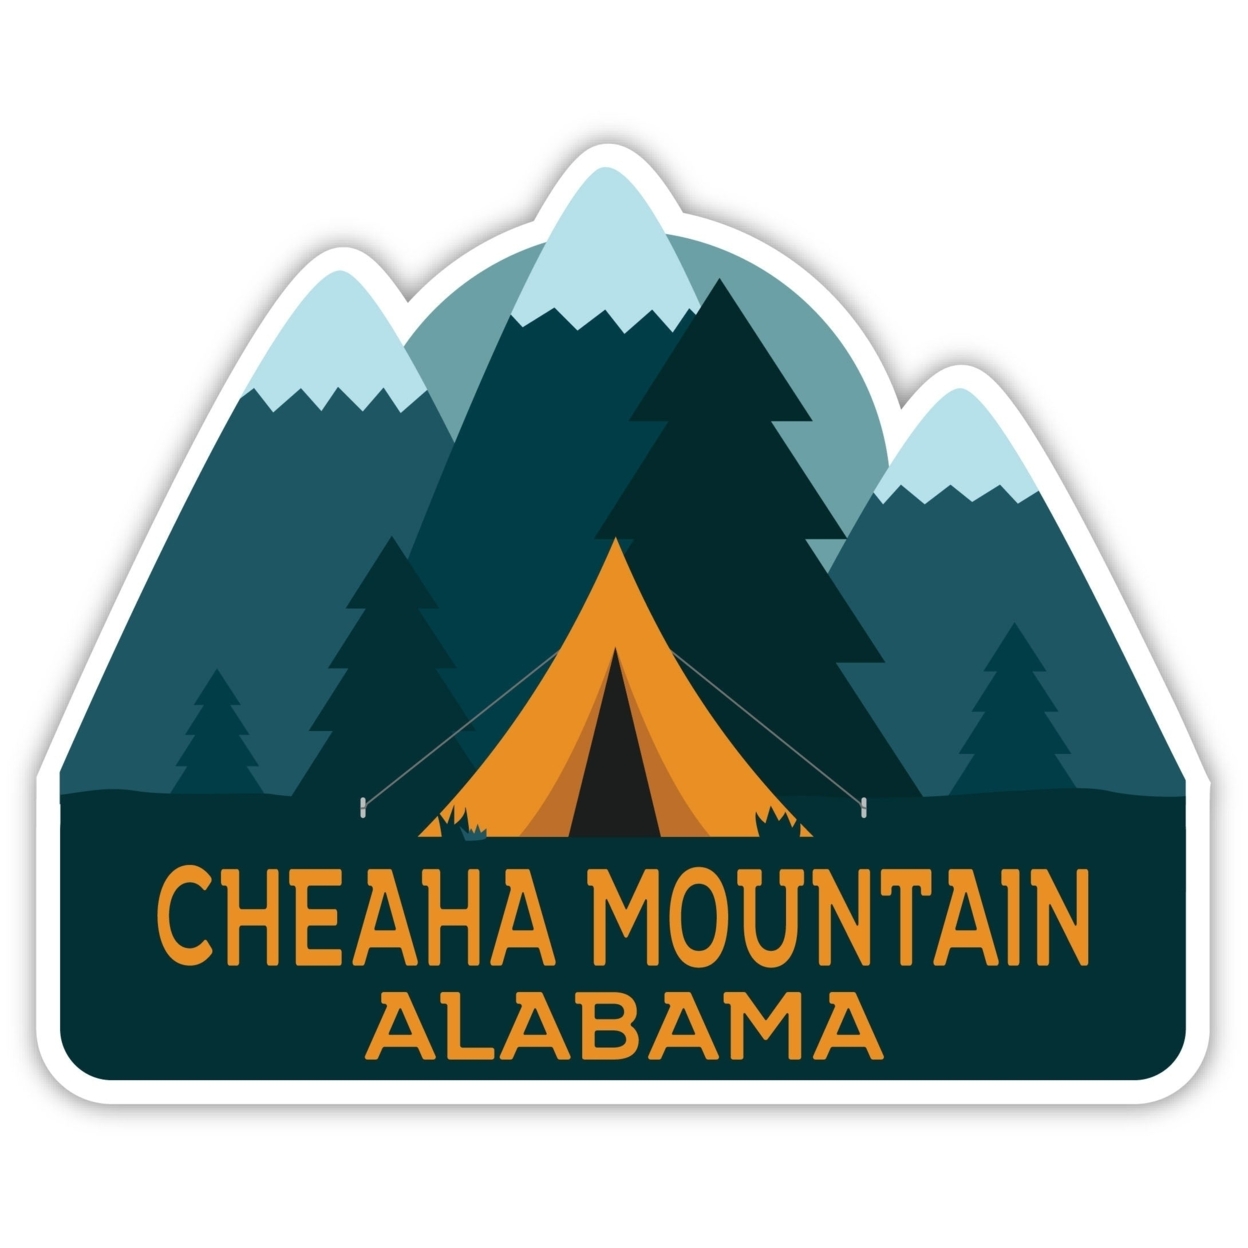 Cheaha Mountain Alabama Souvenir Decorative Stickers (Choose Theme And Size) - 4-Pack, 12-Inch, Bear